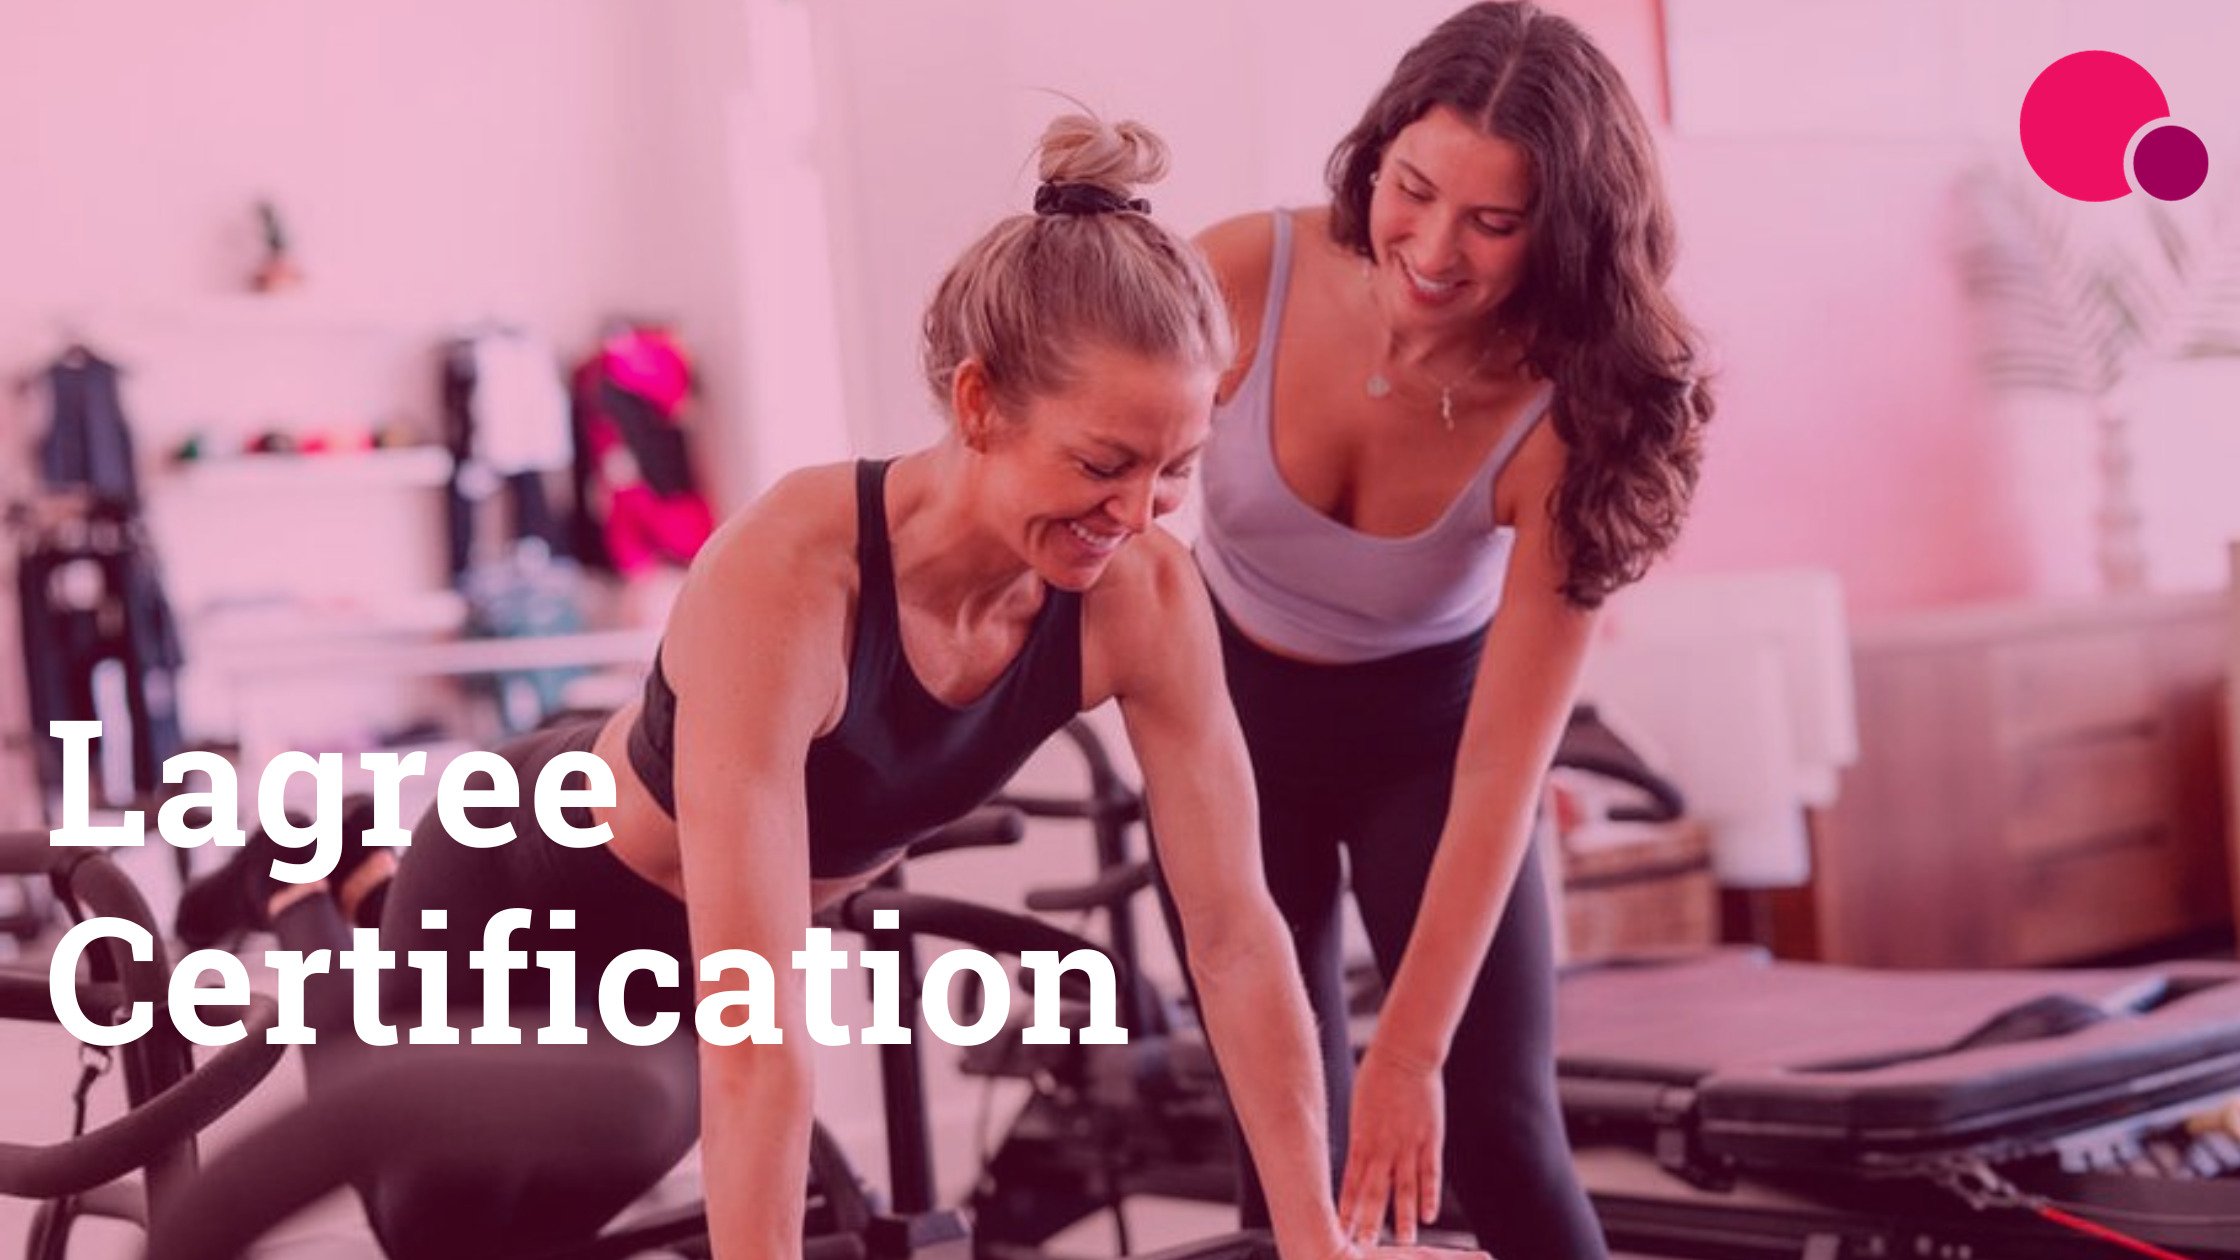 Lagree certification: Your path to becoming a Lagree trainer